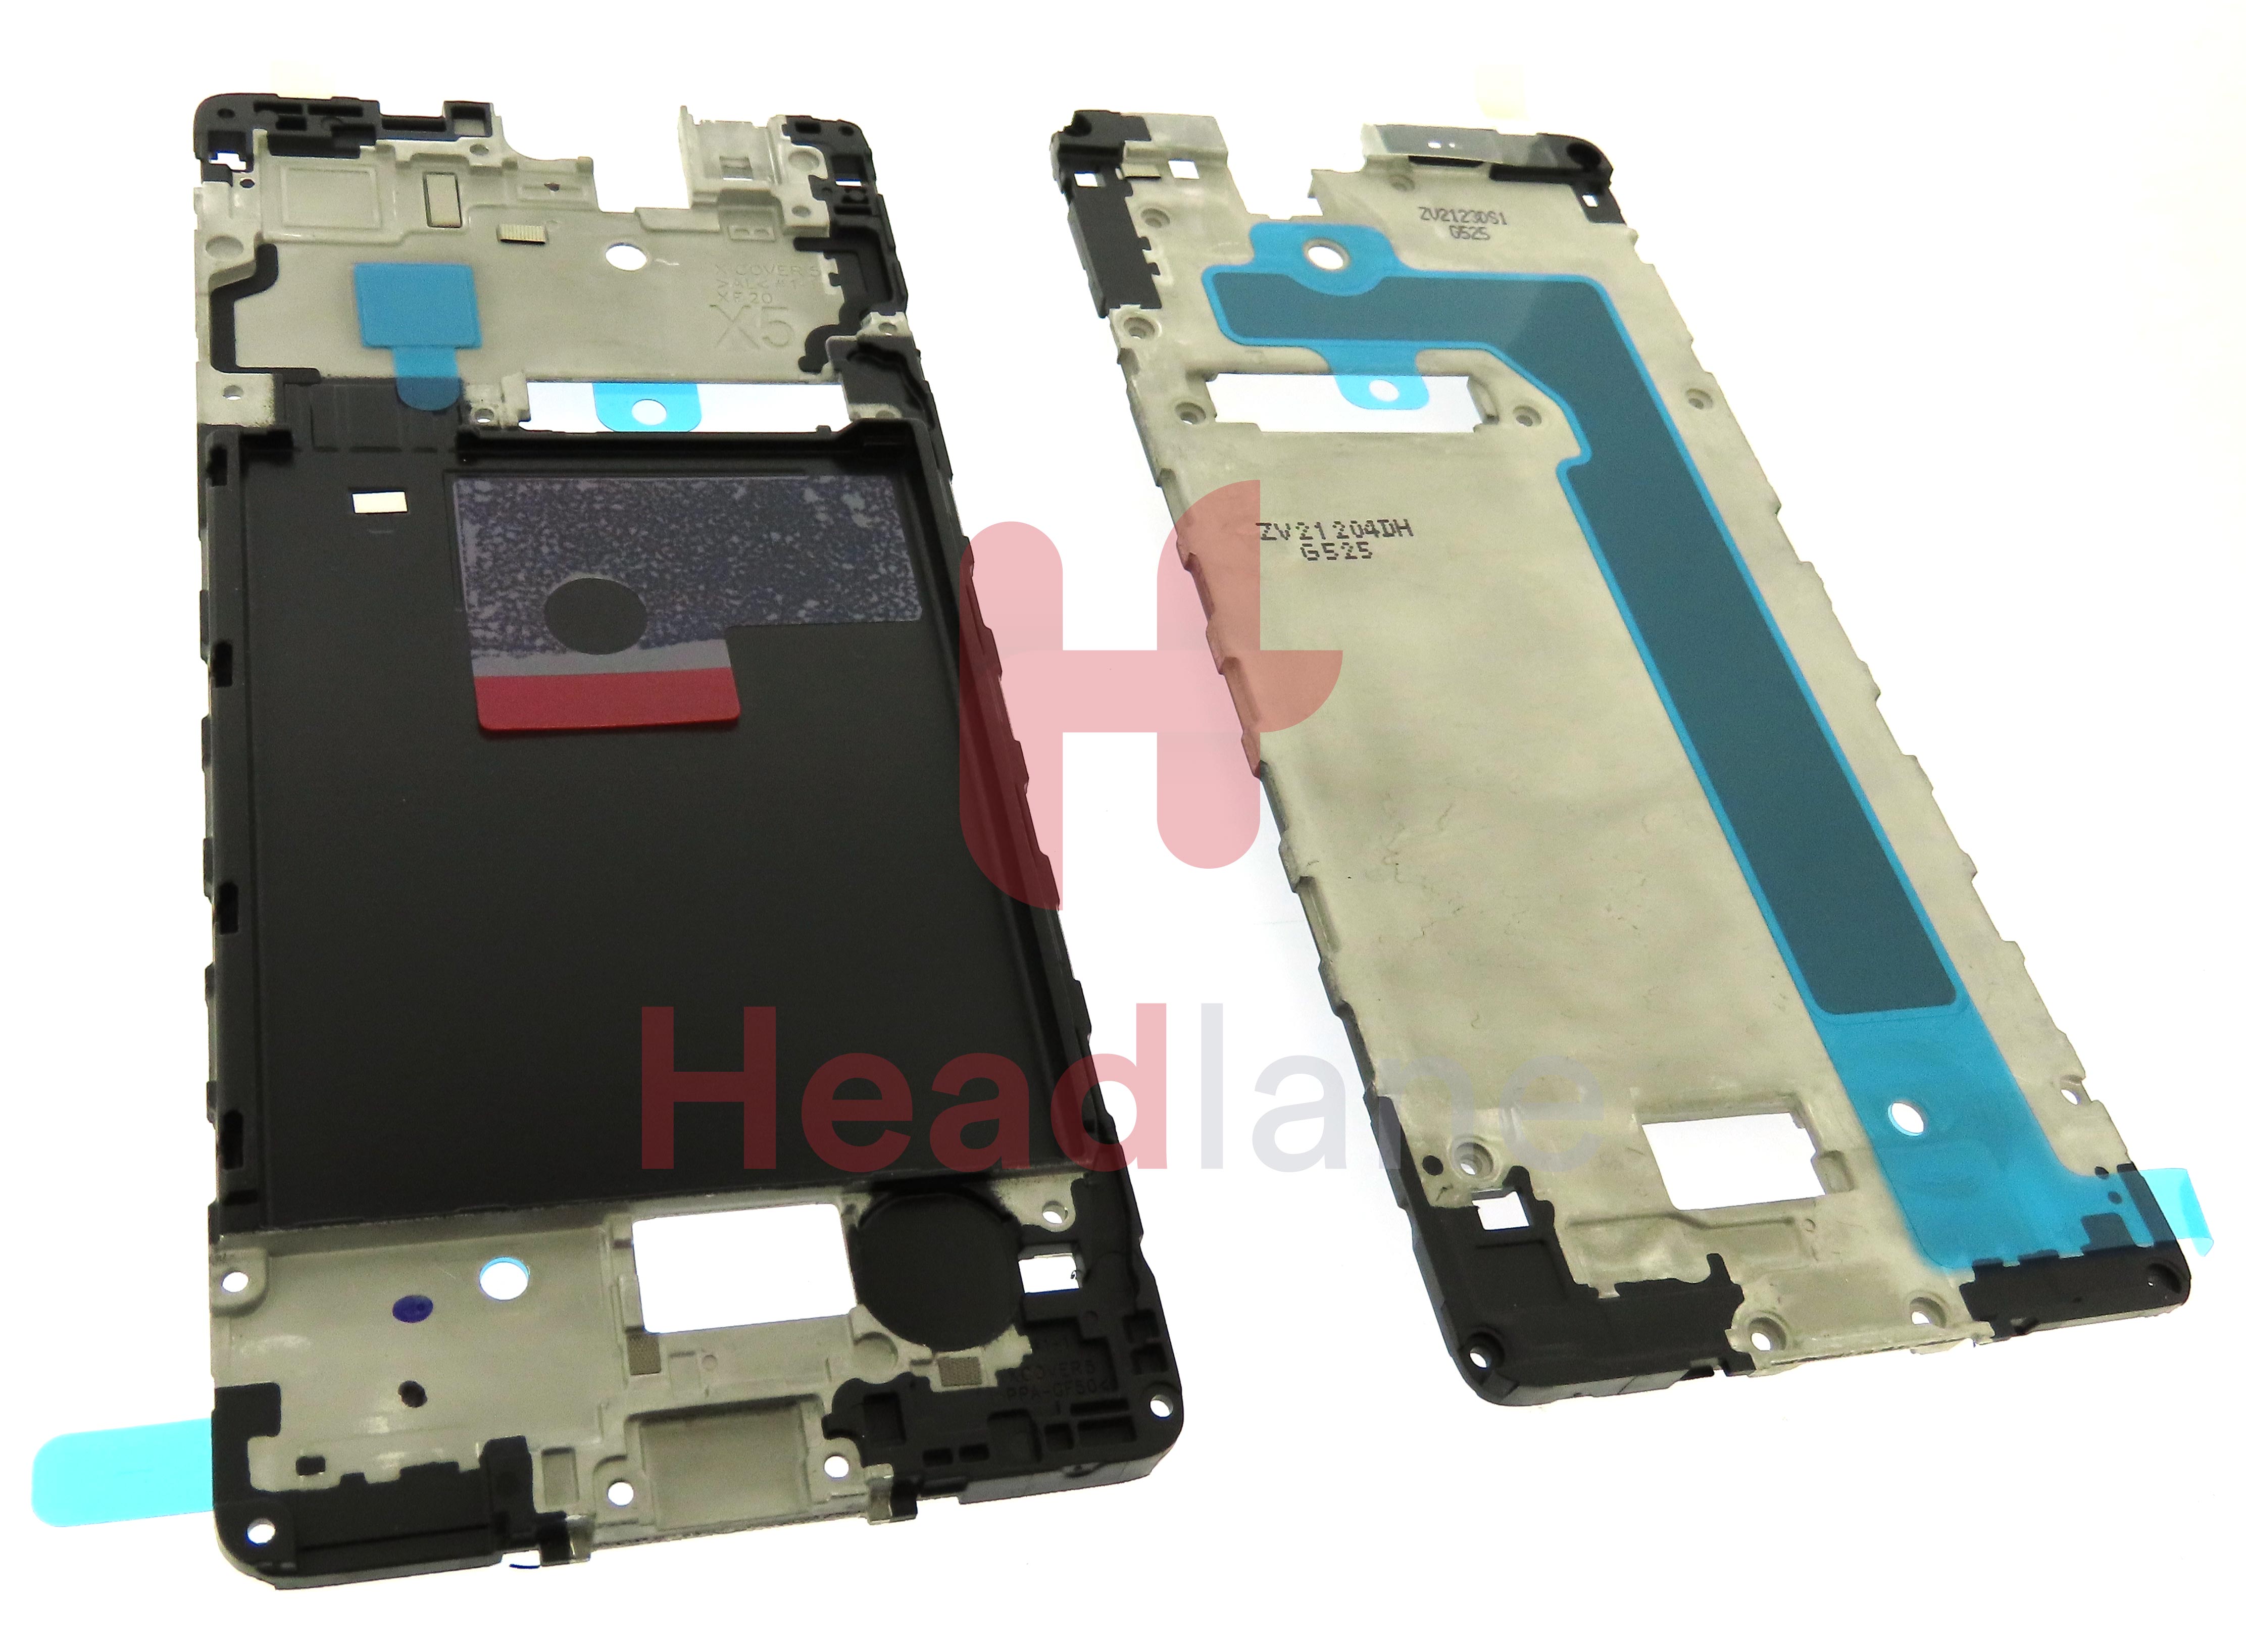 Samsung SM-G525 Galaxy Xcover 5 Front Cover / Frame